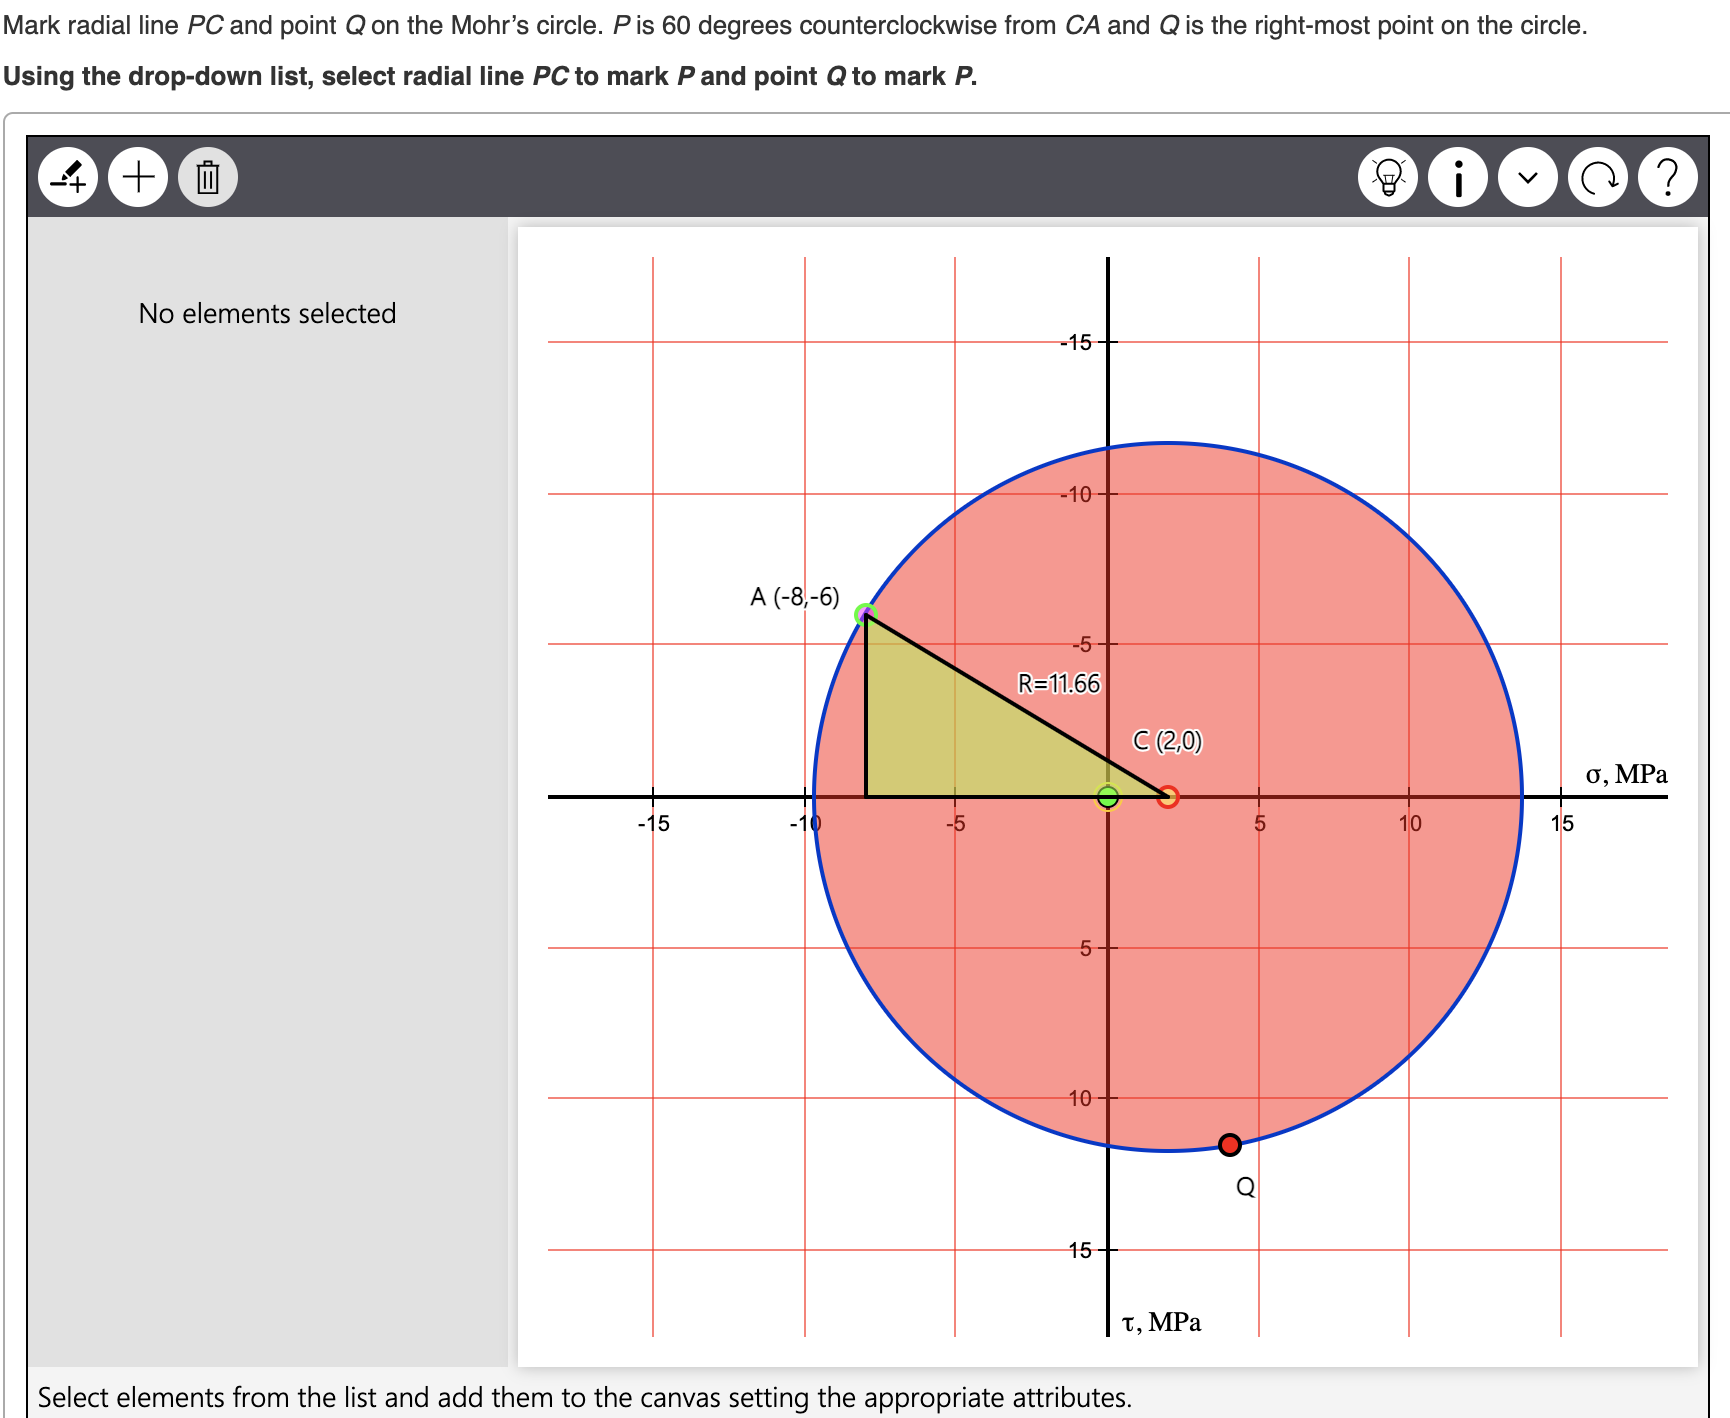 Solved lark radial line PC and point Q on the Mohr's circle.